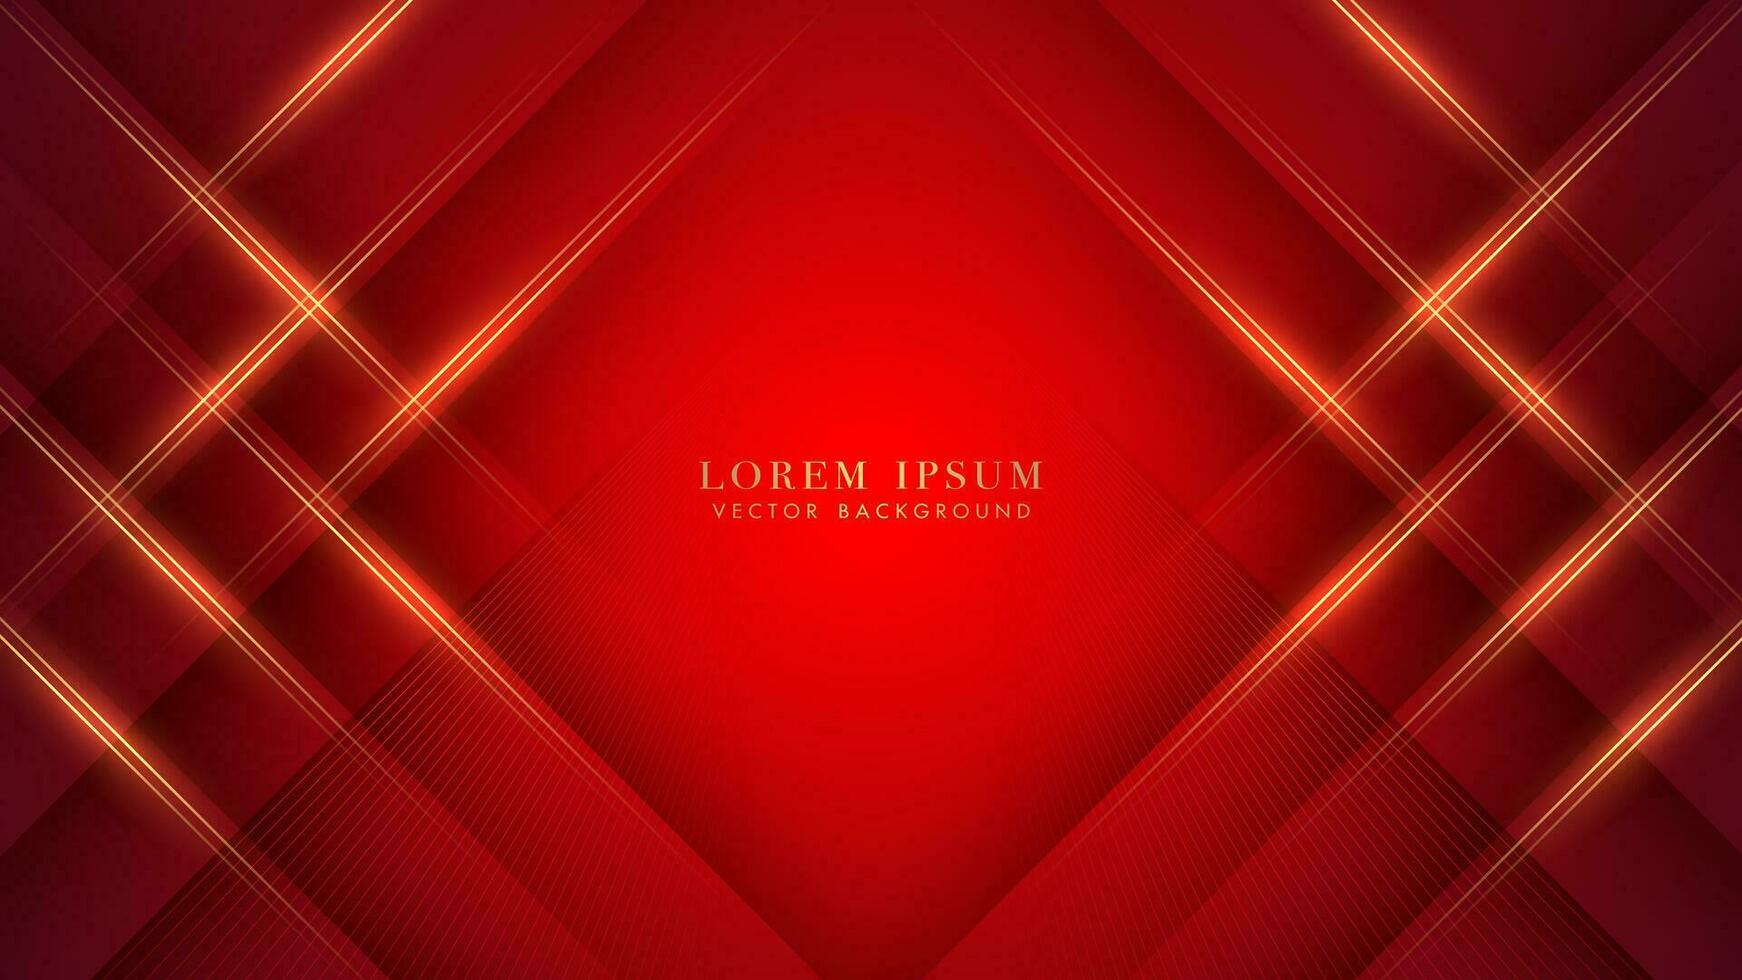 Golden line stripes crossing diagonally on luxurious red background. Elegant design style concept vector